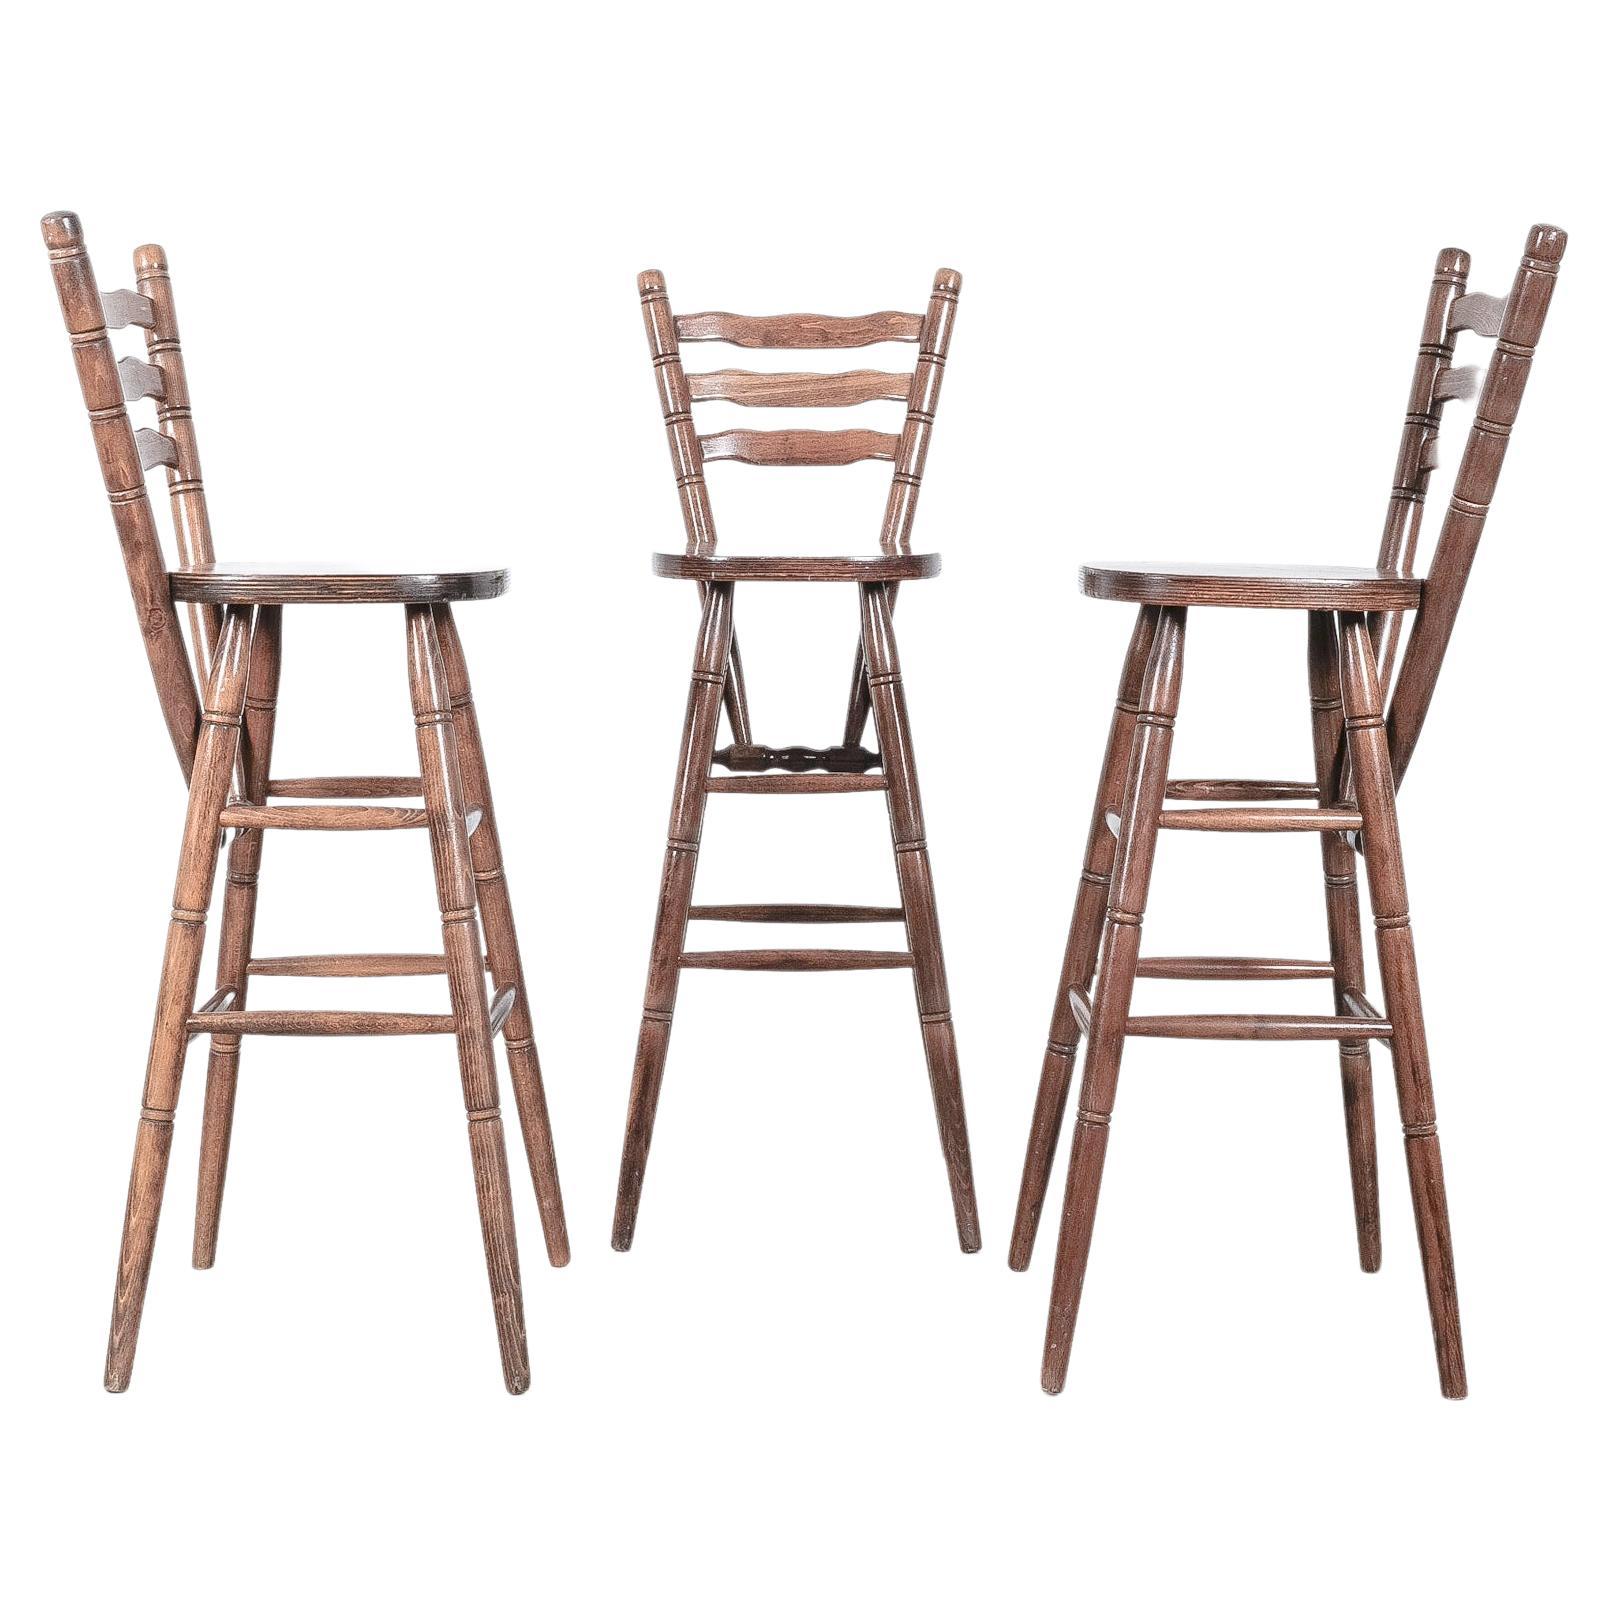 Rustic Bar Stools Midcentury from Birch Wood, Germany, 1970